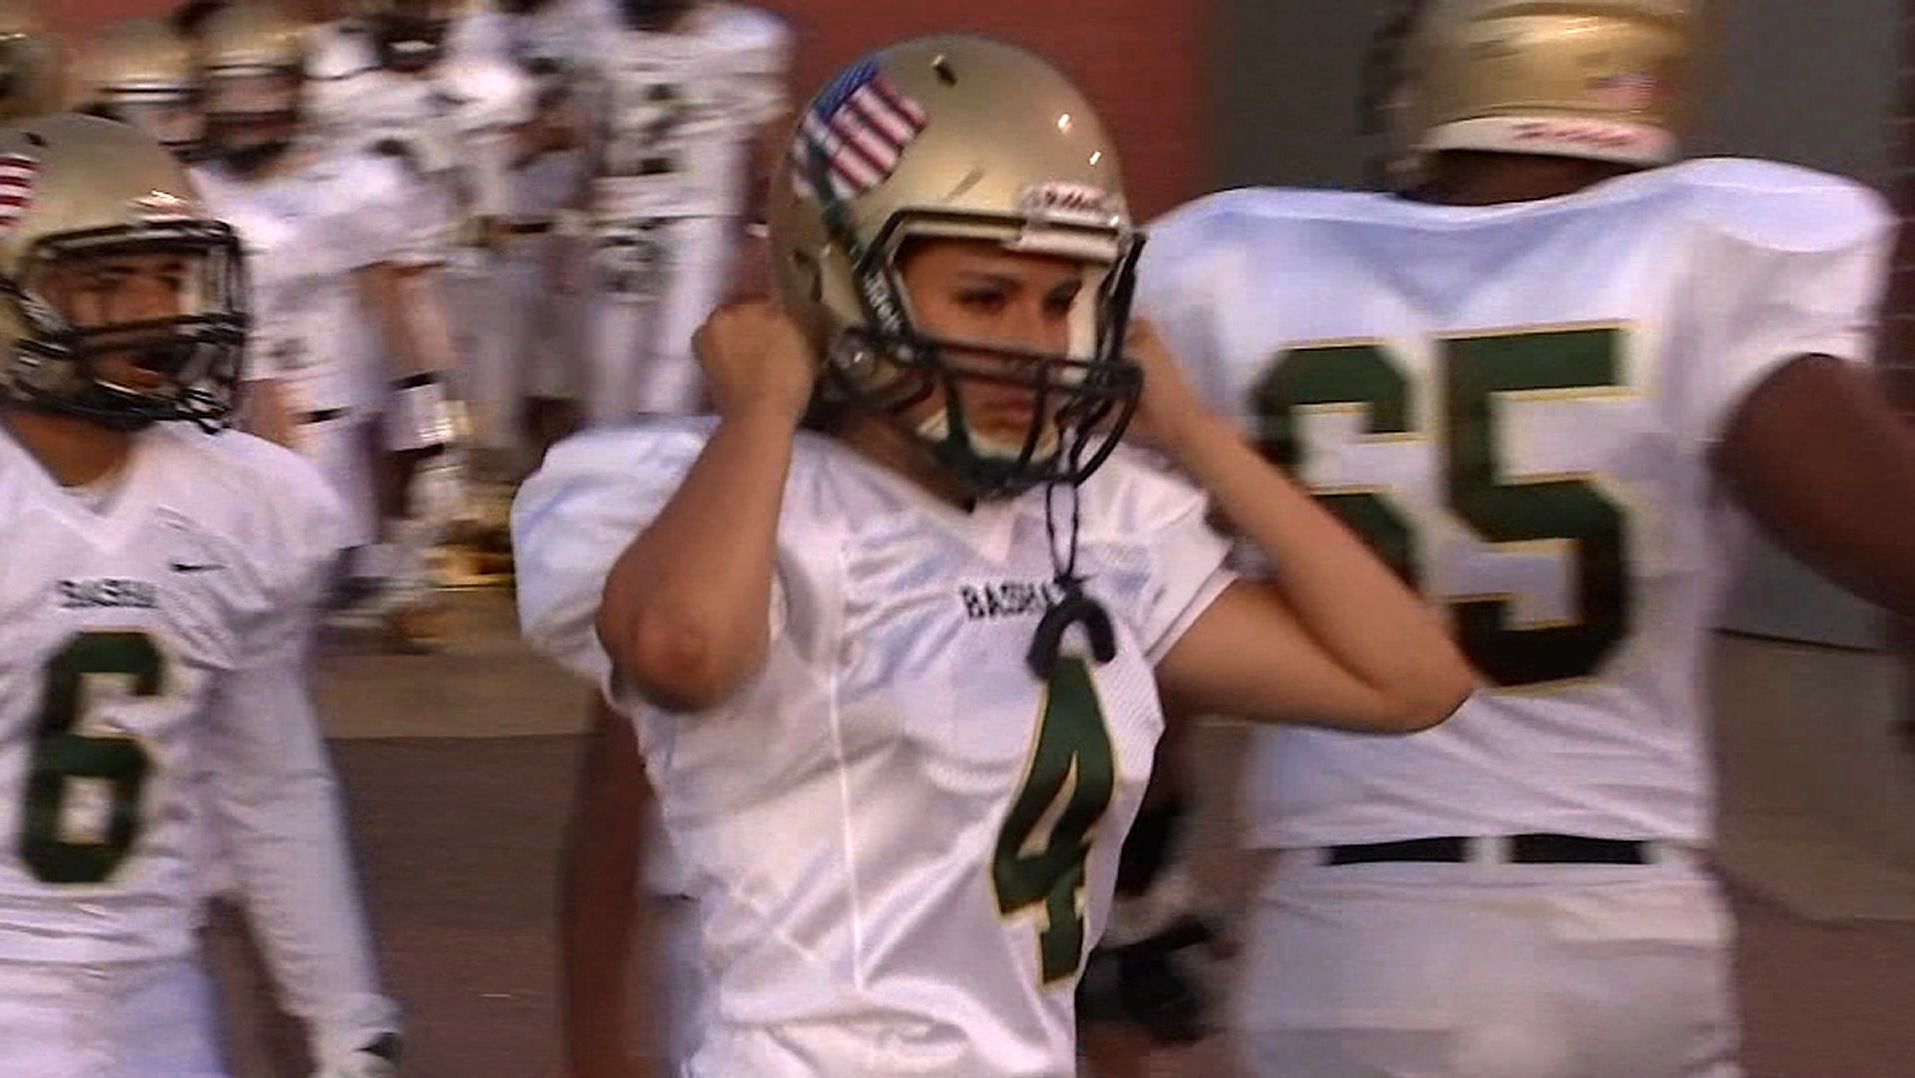 Becca Longo, a high school senior in Arizona, began playing football competitively as a sophomore.